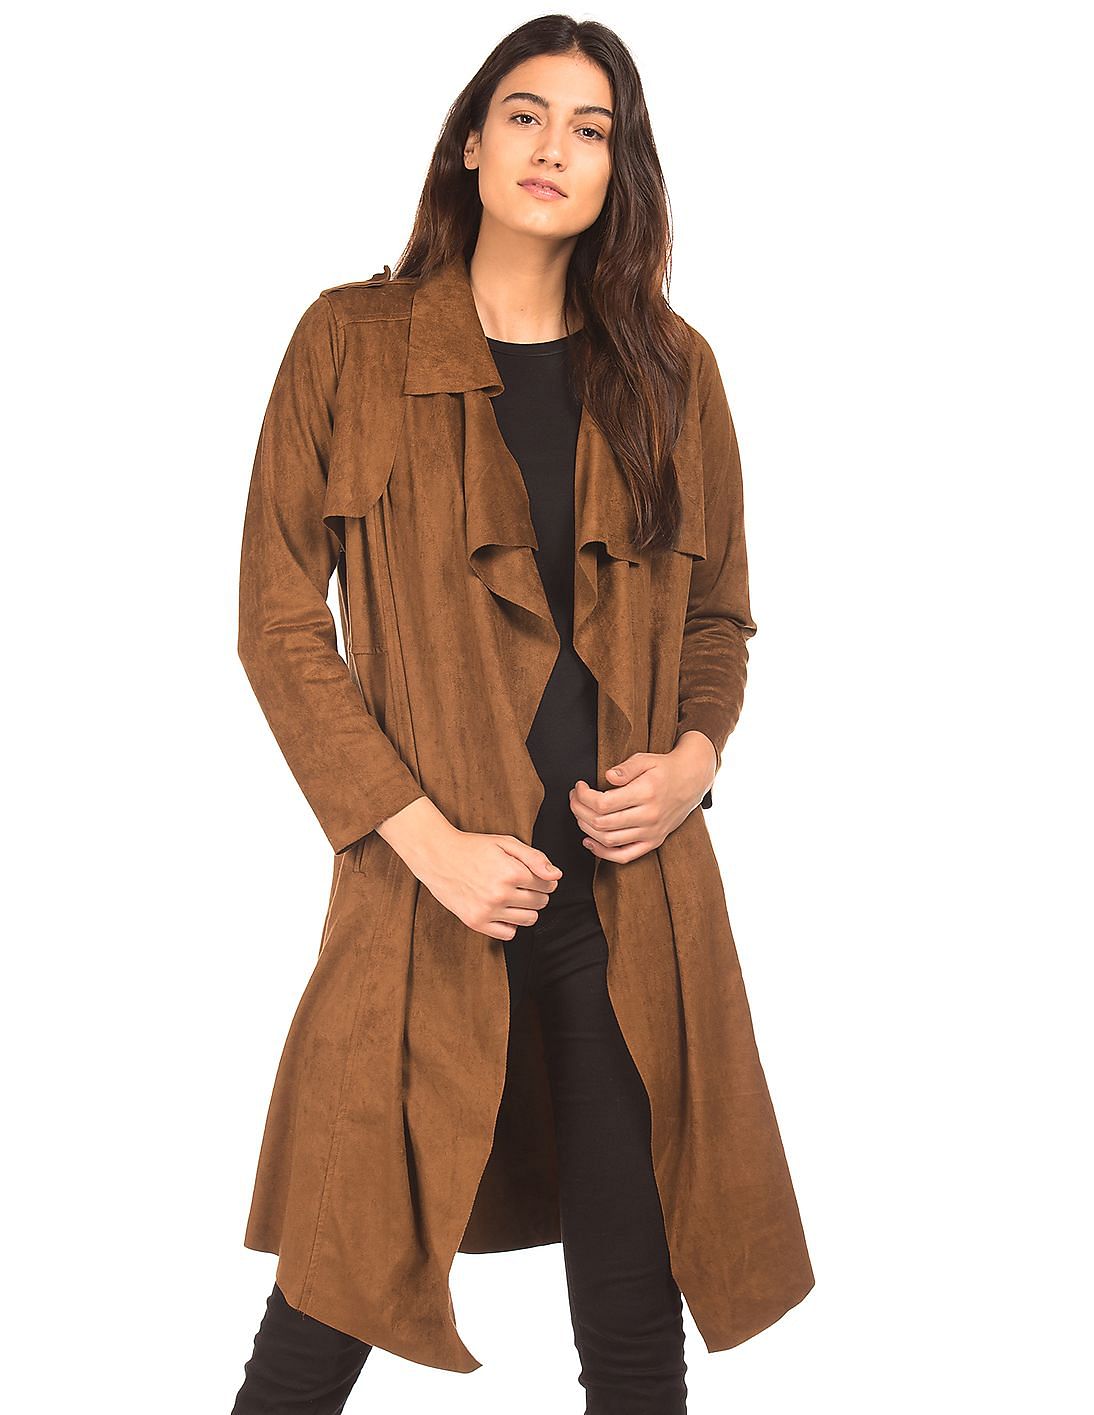 Buy Elle Studio Suedette Waterfall Front Trench Coat - NNNOW.com